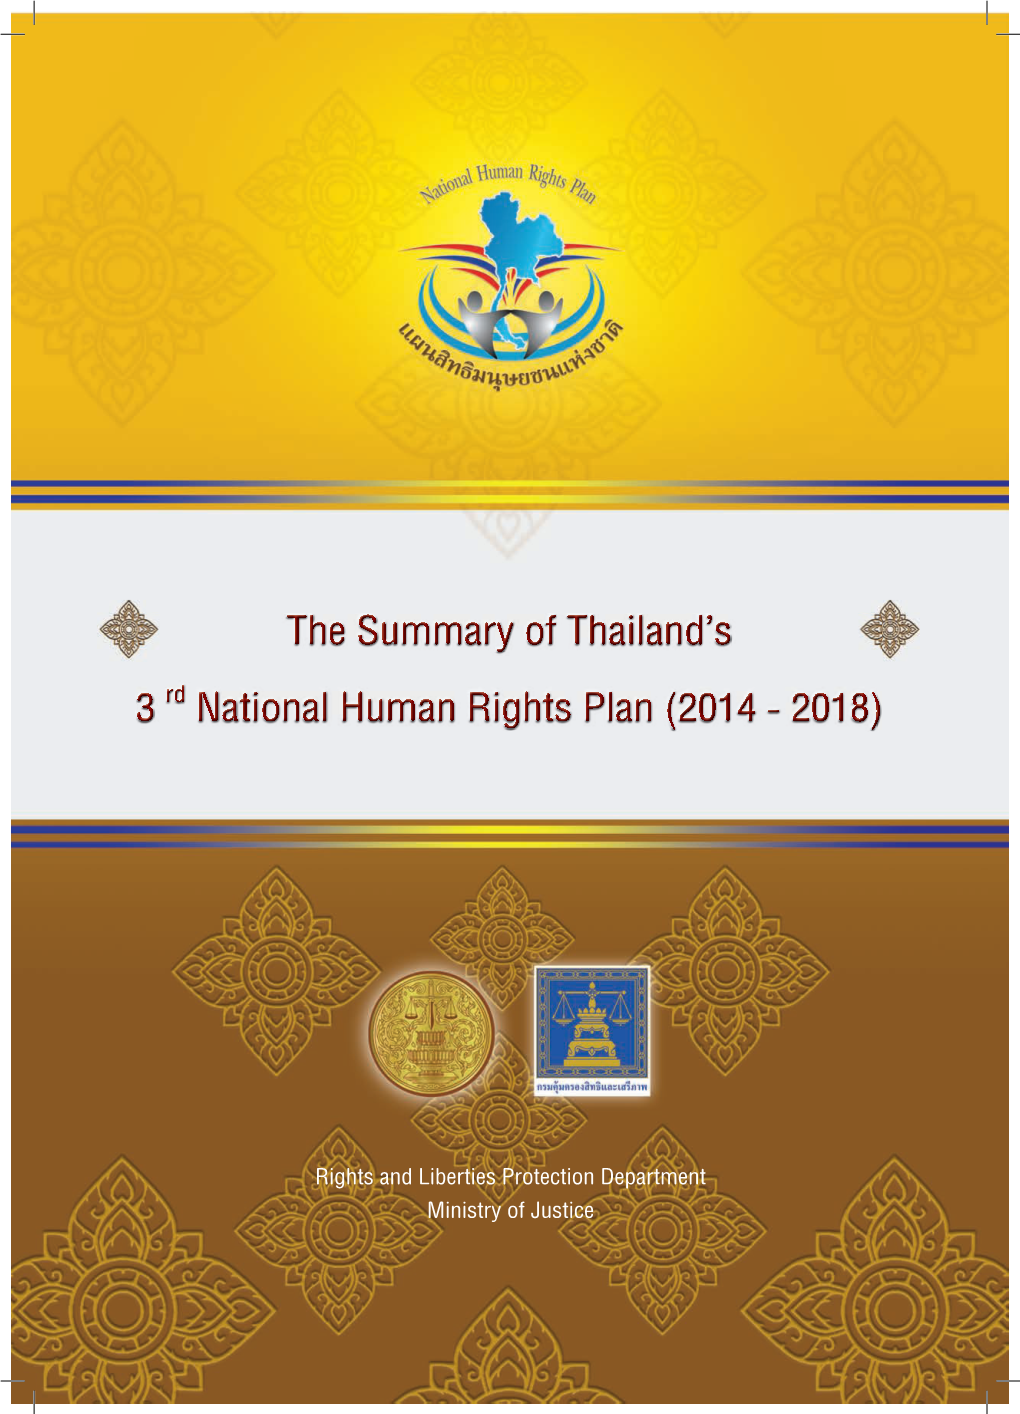 The Summary of Thailand's 3 Rd National Human Rights Plan (2014